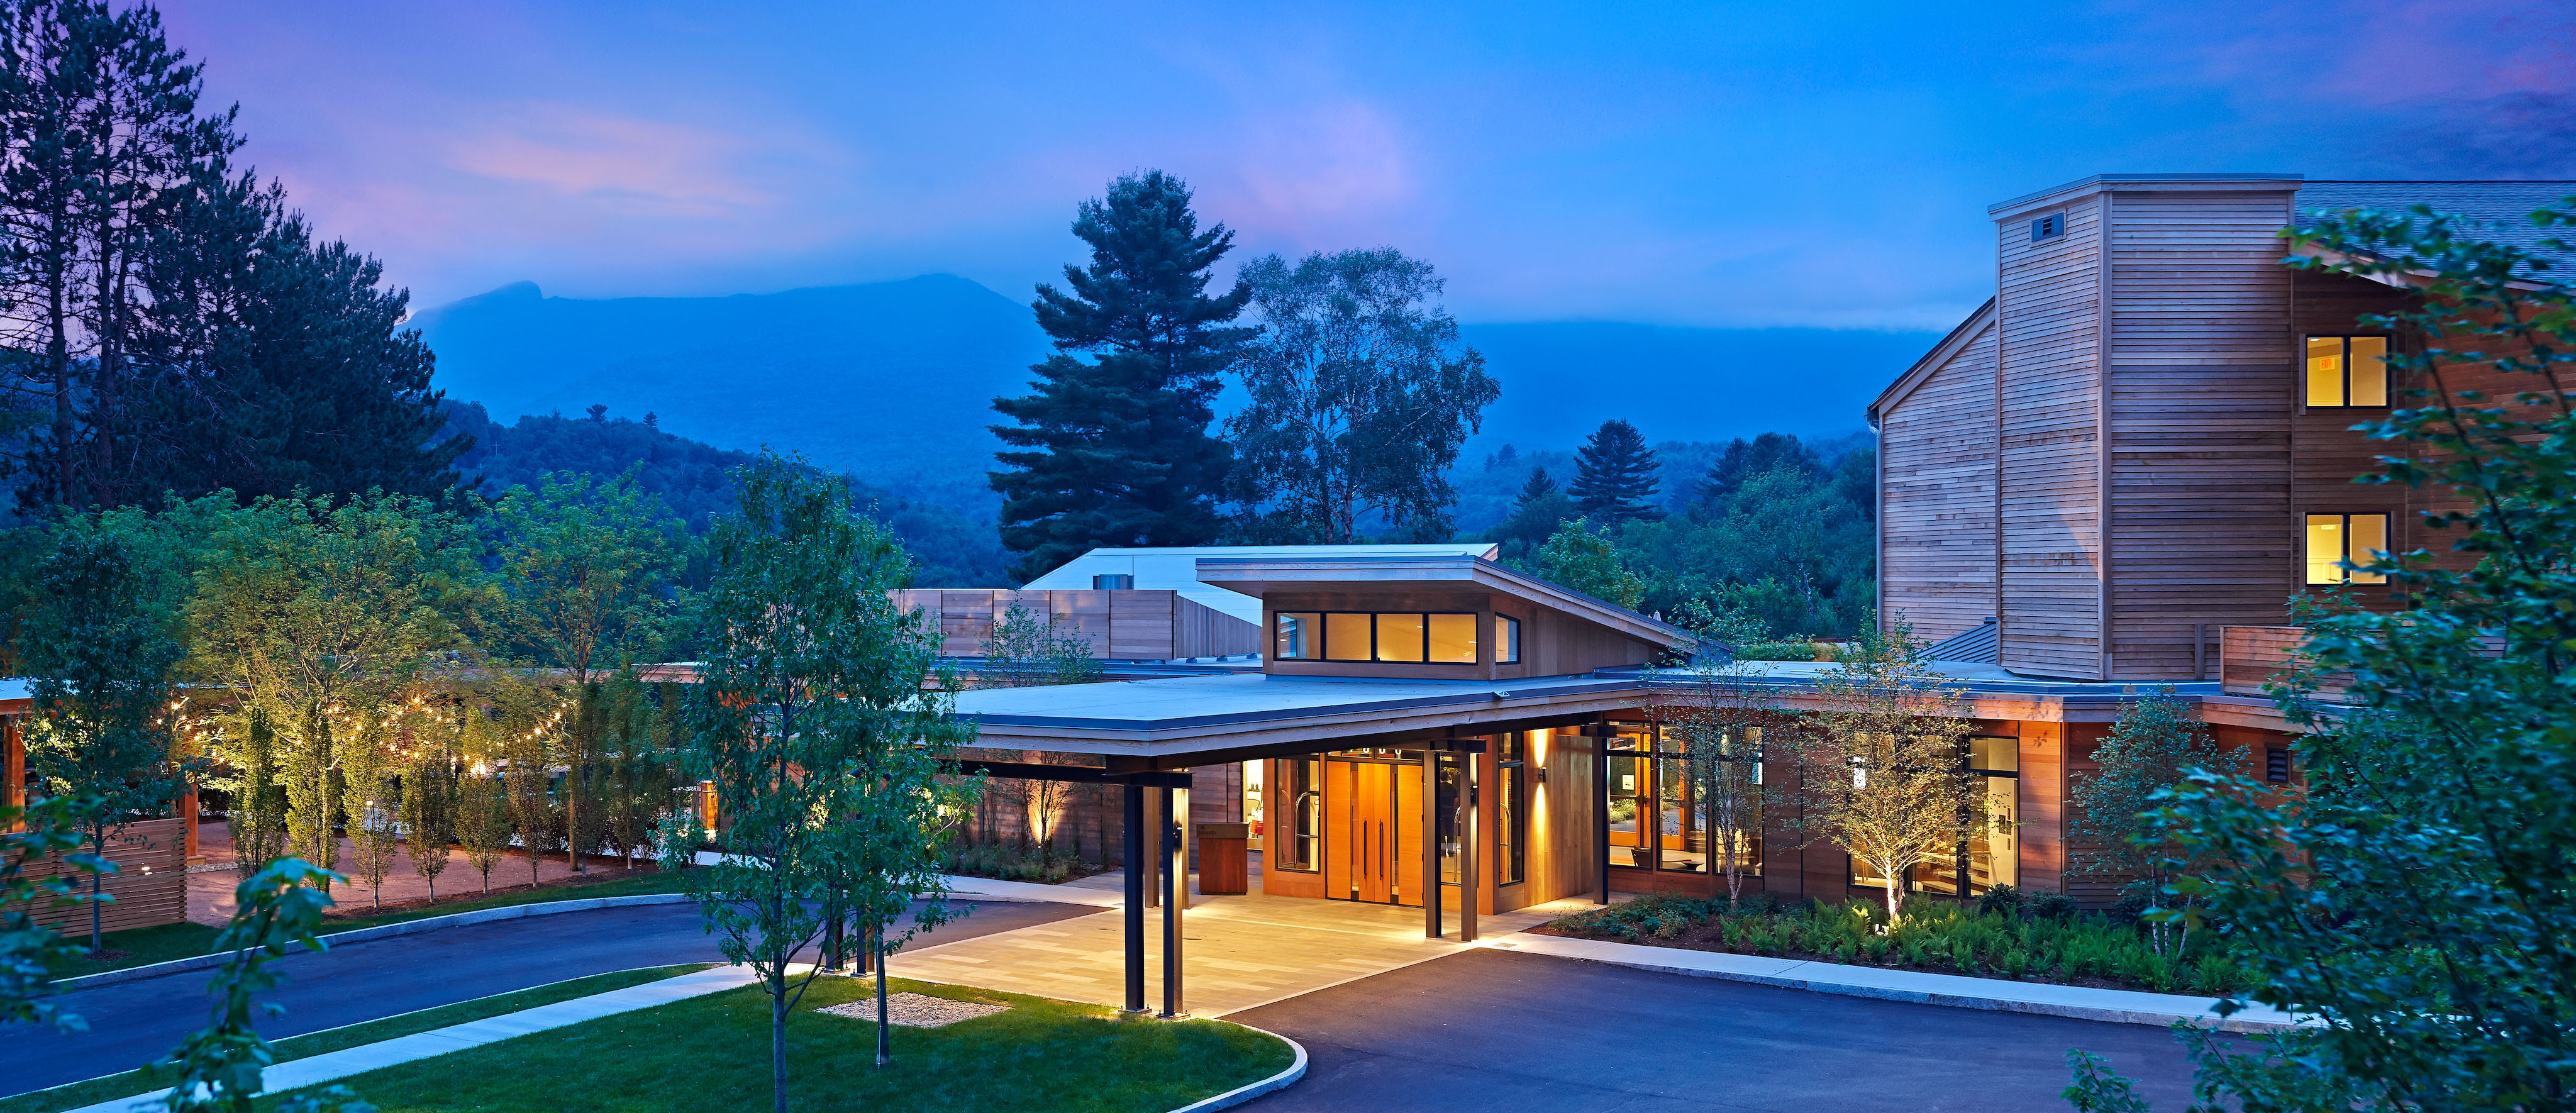 topnotch resort and spa vermont